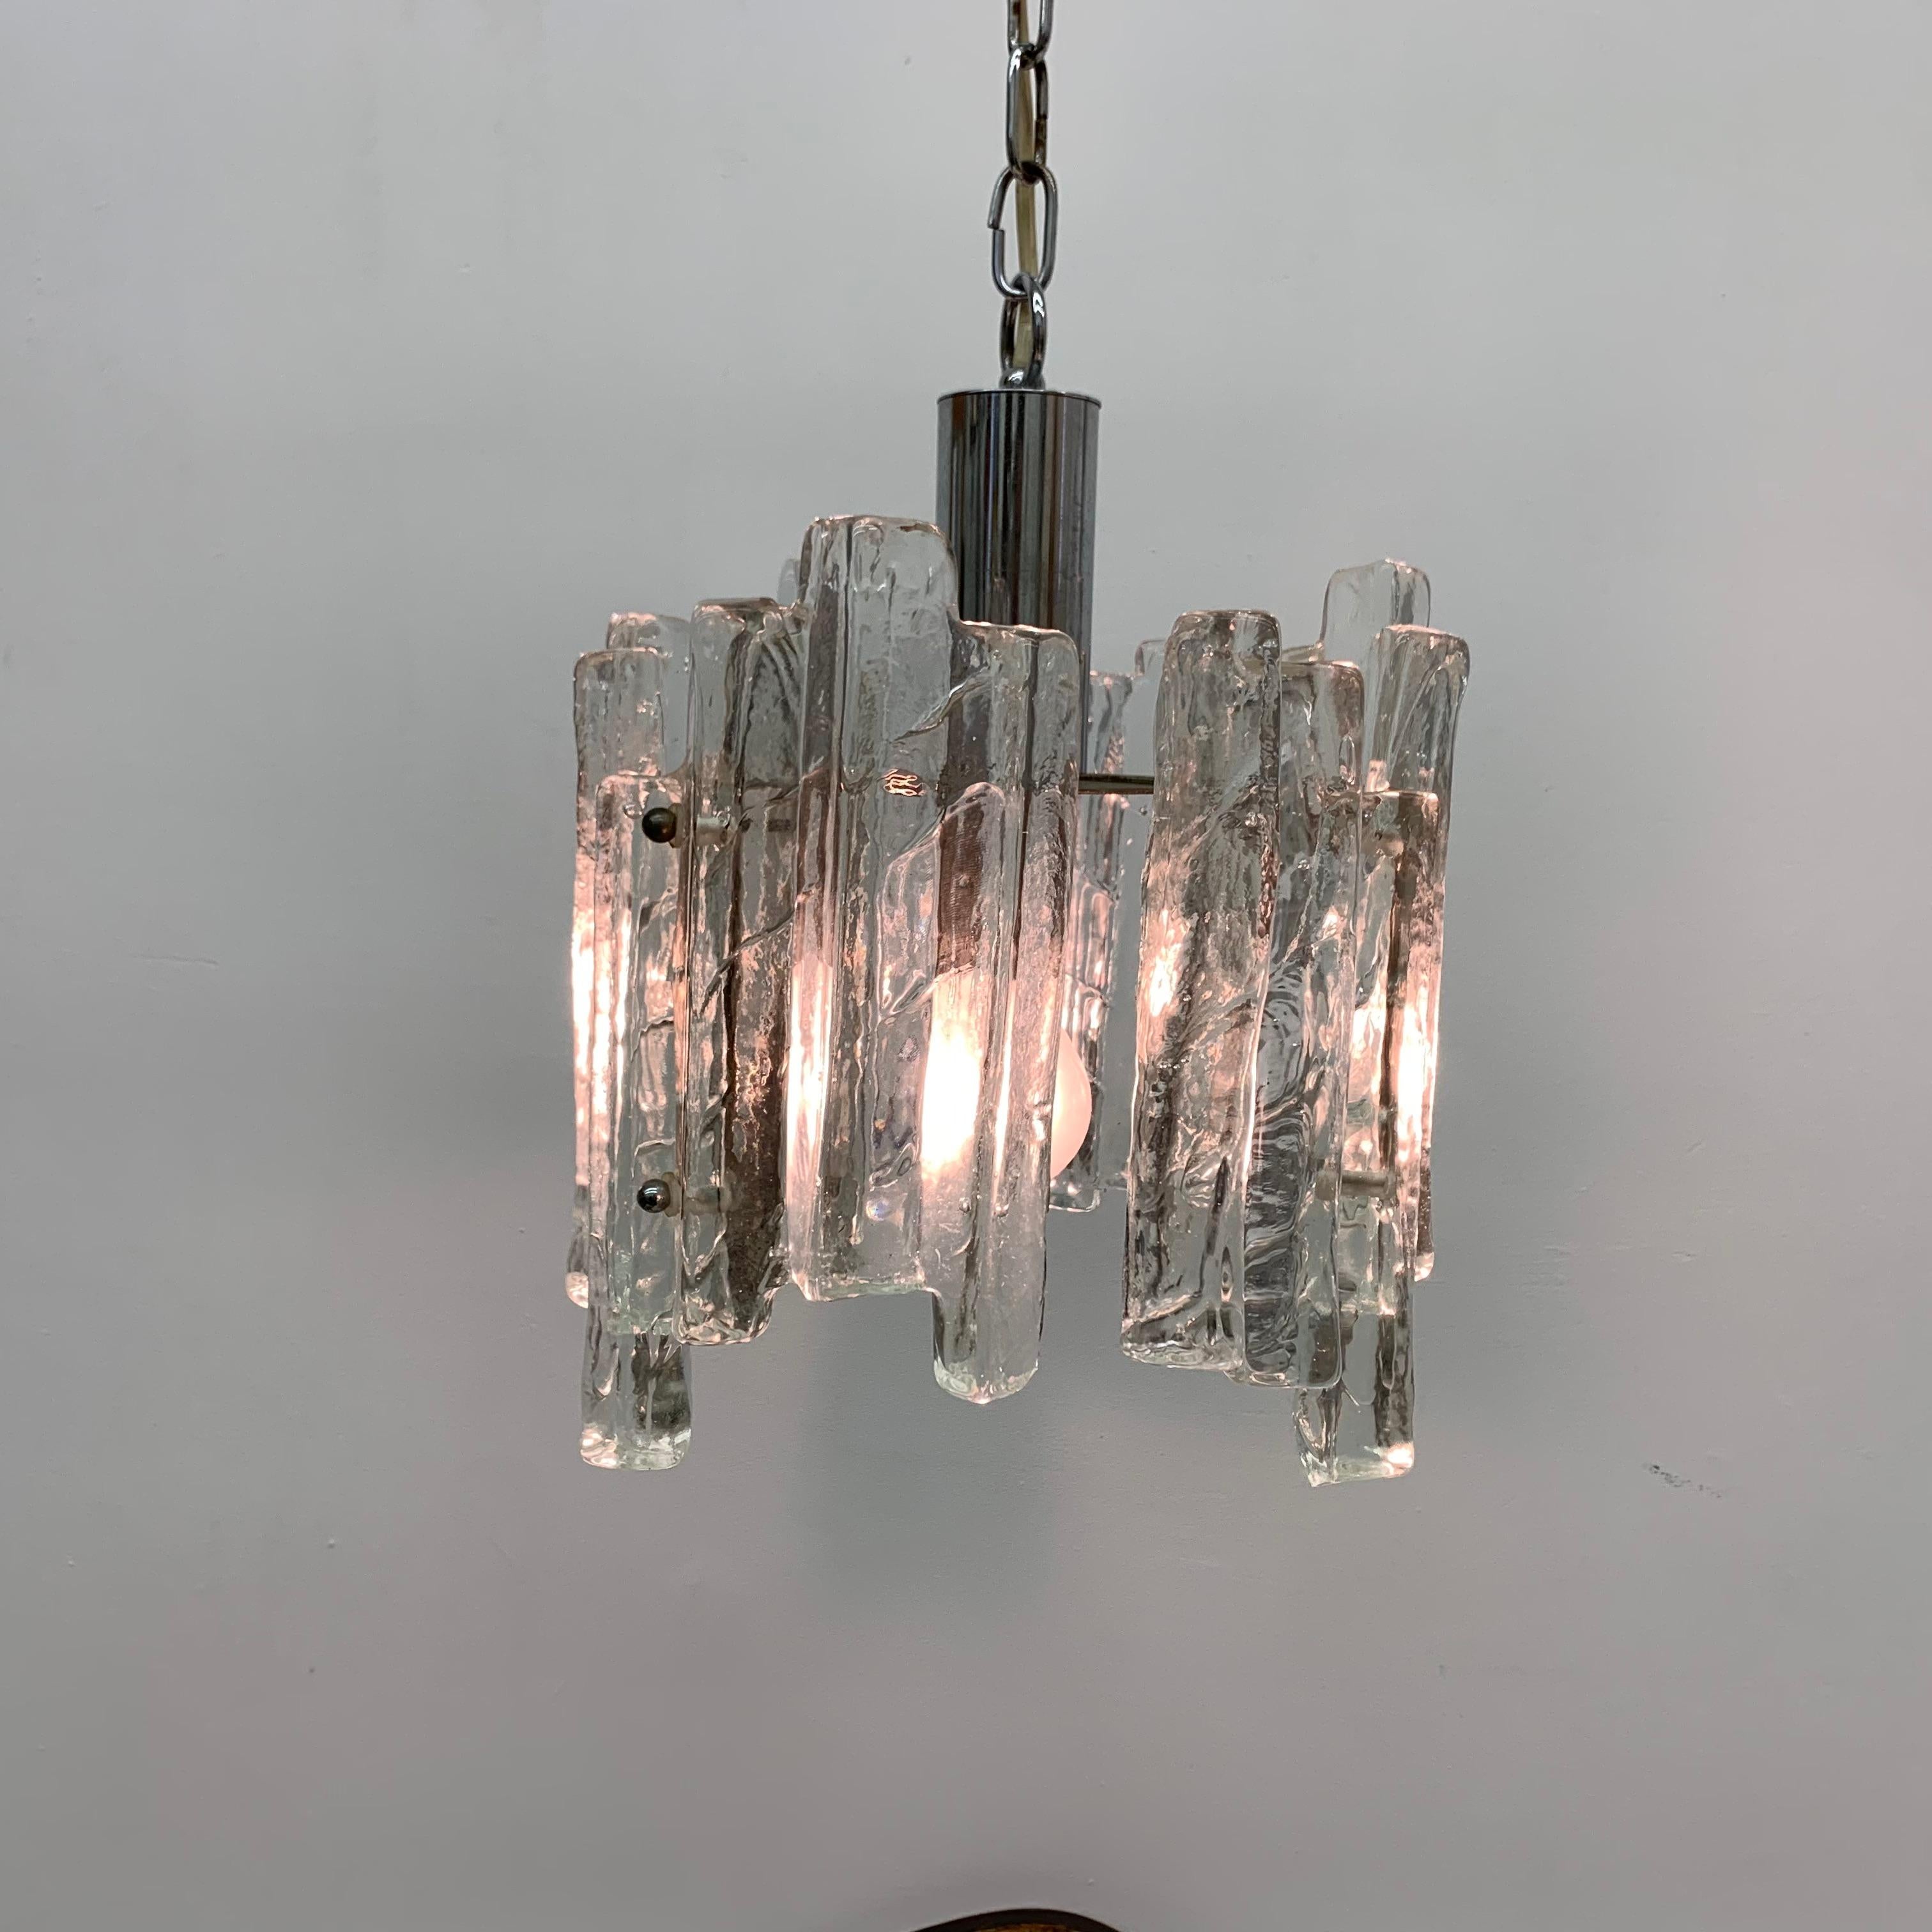 Hanging lamp in Frosted Ice Glass by J. T. Kalmar for Kalmar Franken KG, 1960s For Sale 5